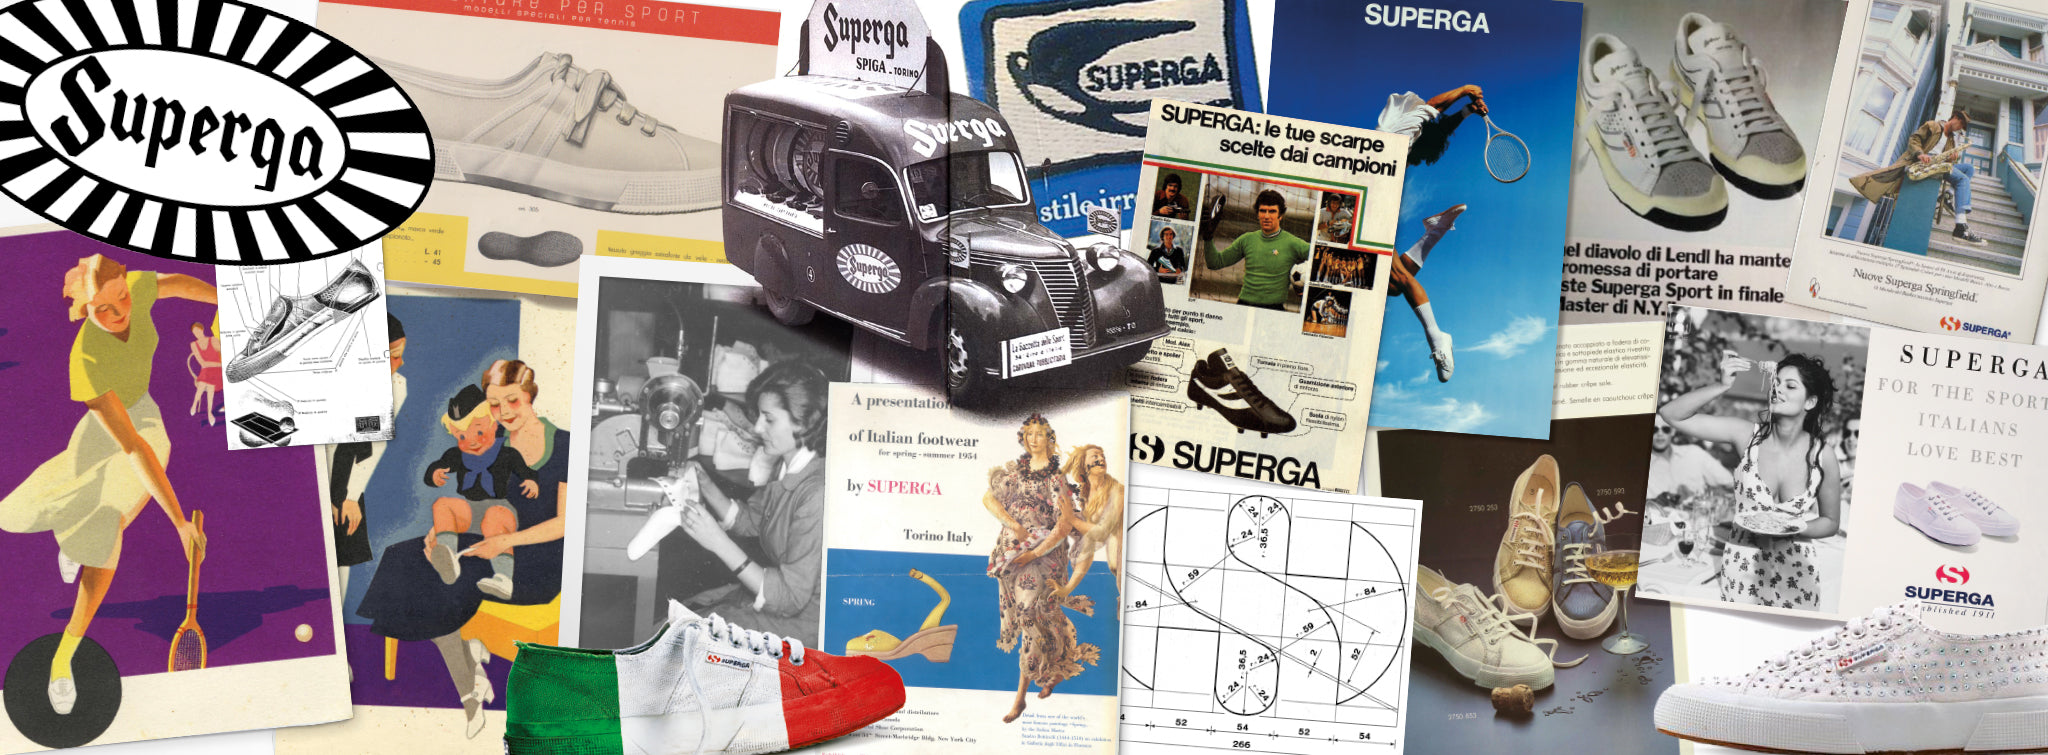 Collage of Superga Marketing over the decades.